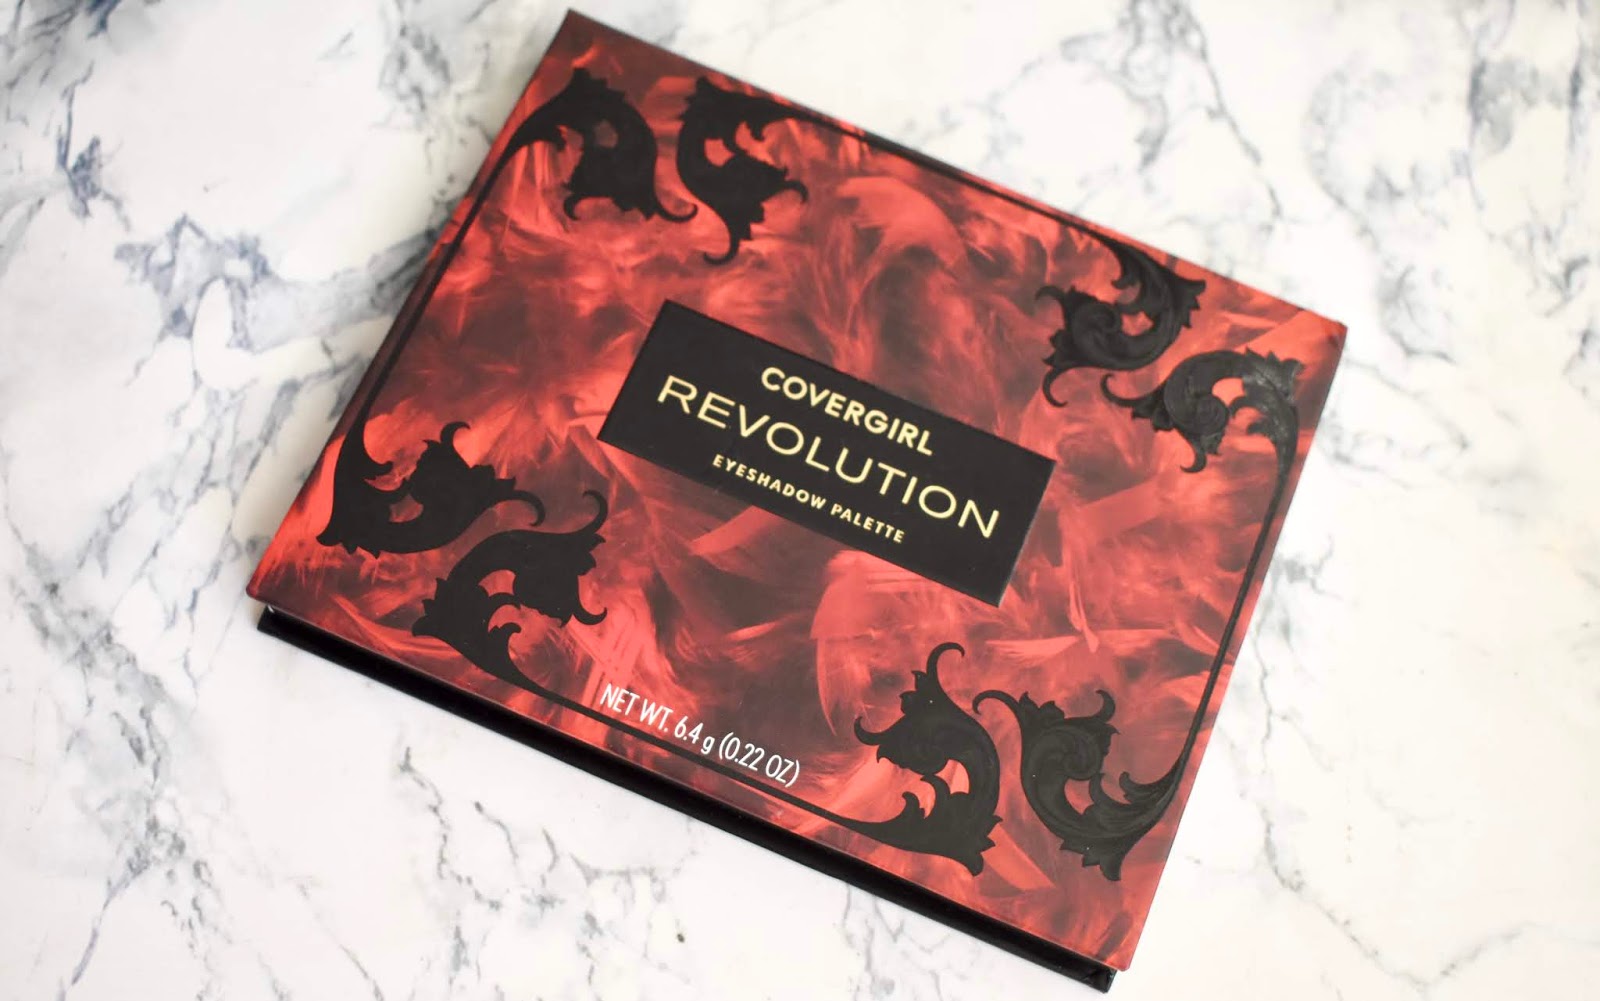 Aquaheart: Covergirl Revolution Eyeshadow Palette - Swatches and Review